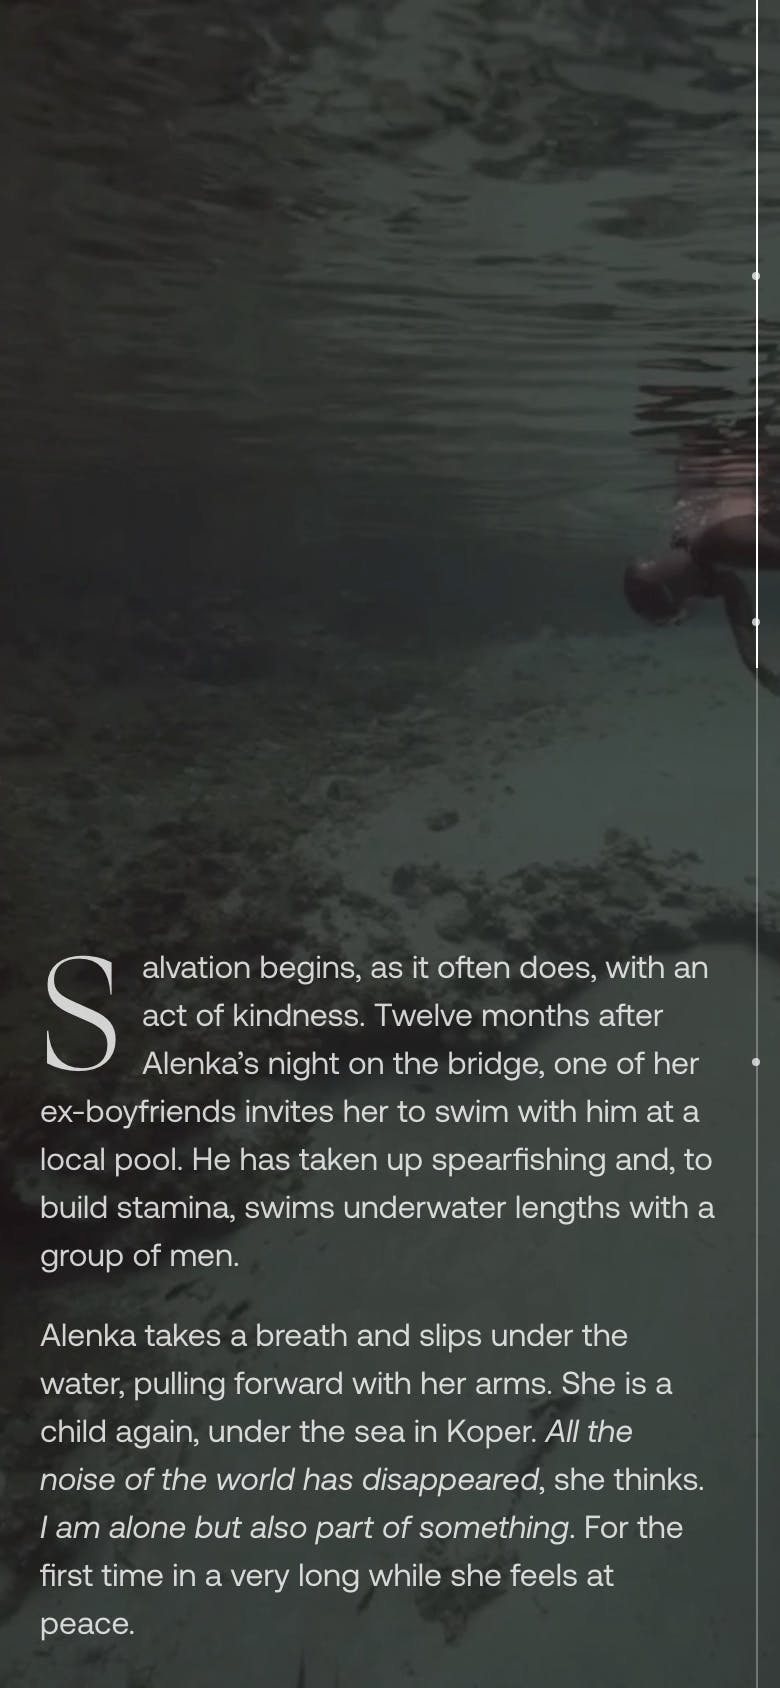 A screenshot of the mobile site, with text and a video of Alenka diving.